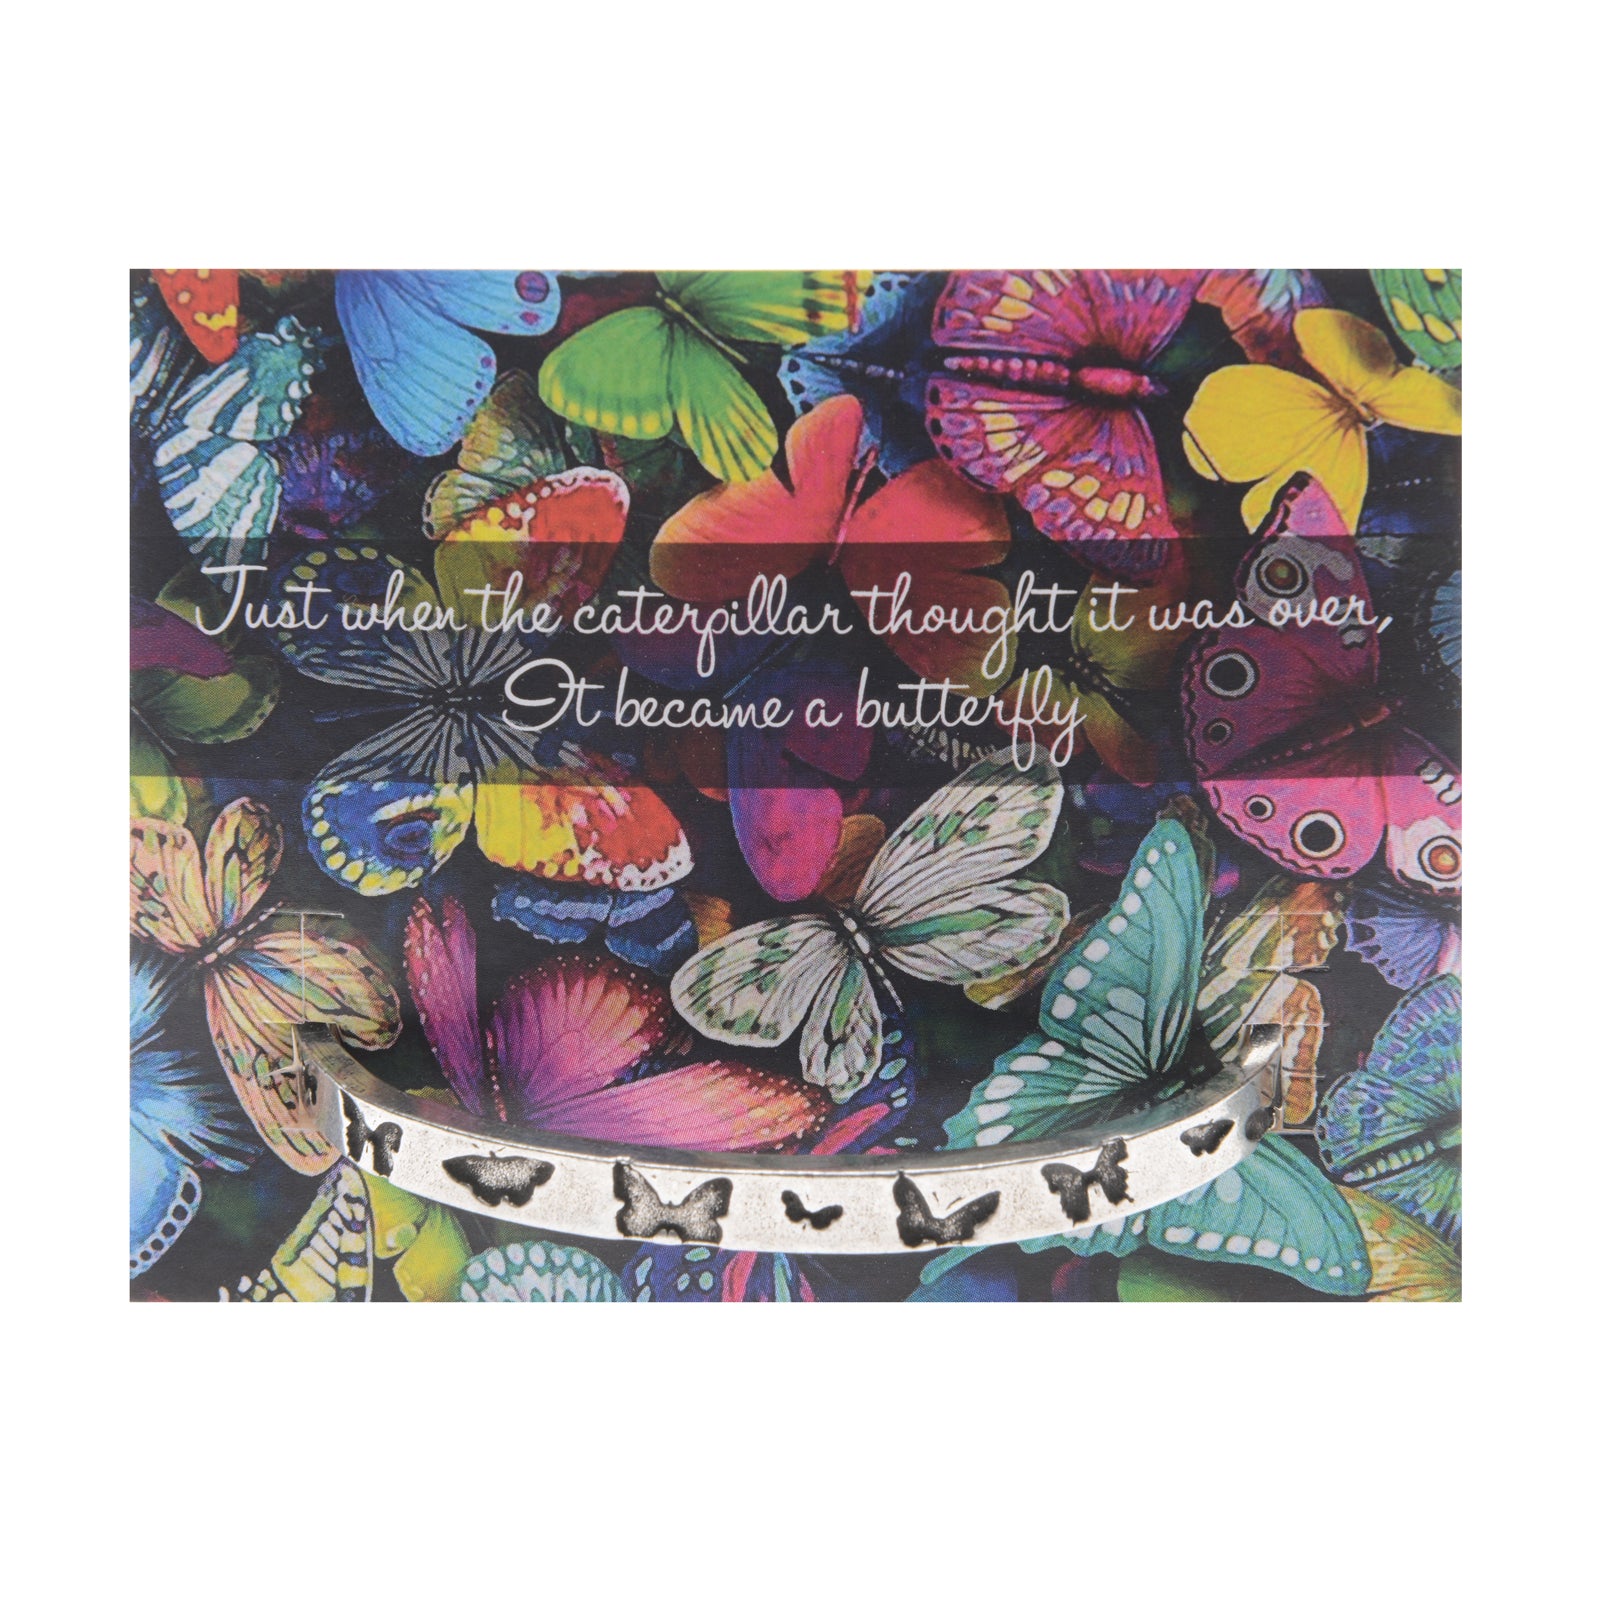 Just when the caterpillar thought the world was over, it became a butterfly Quotable Cuff Bracelet on backer card